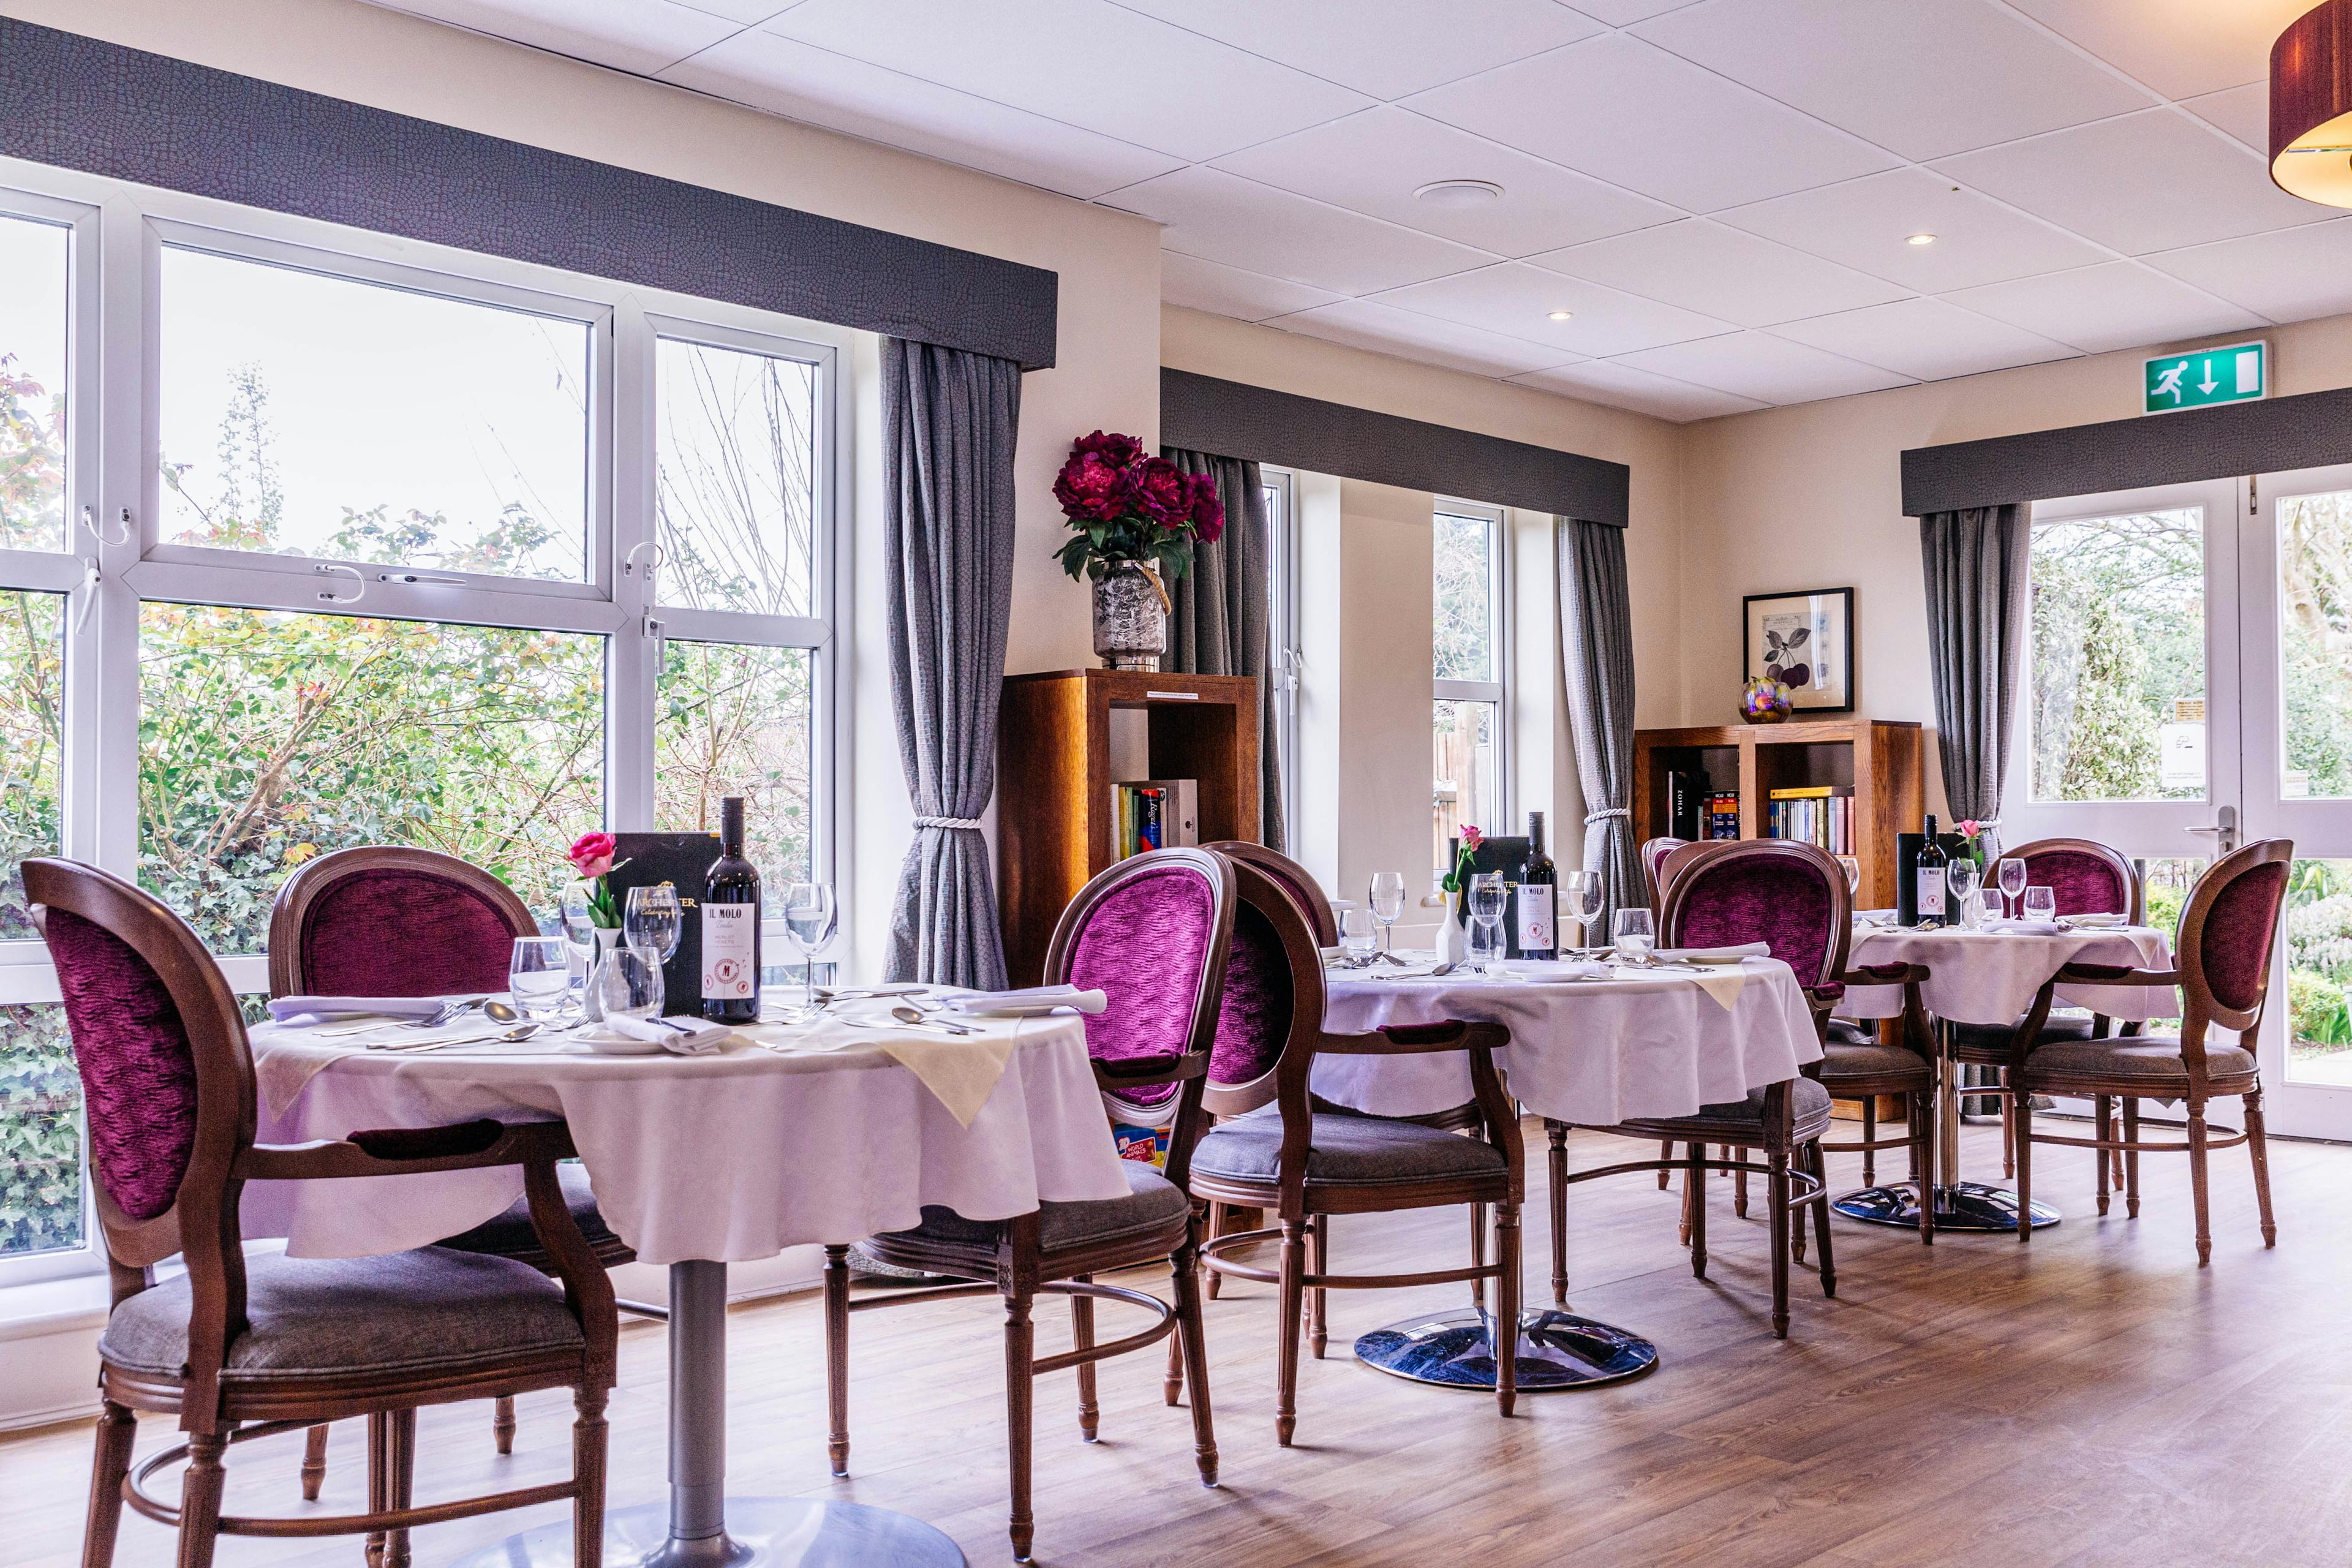 Dining Room at Magnolia Court Care Home in London, England